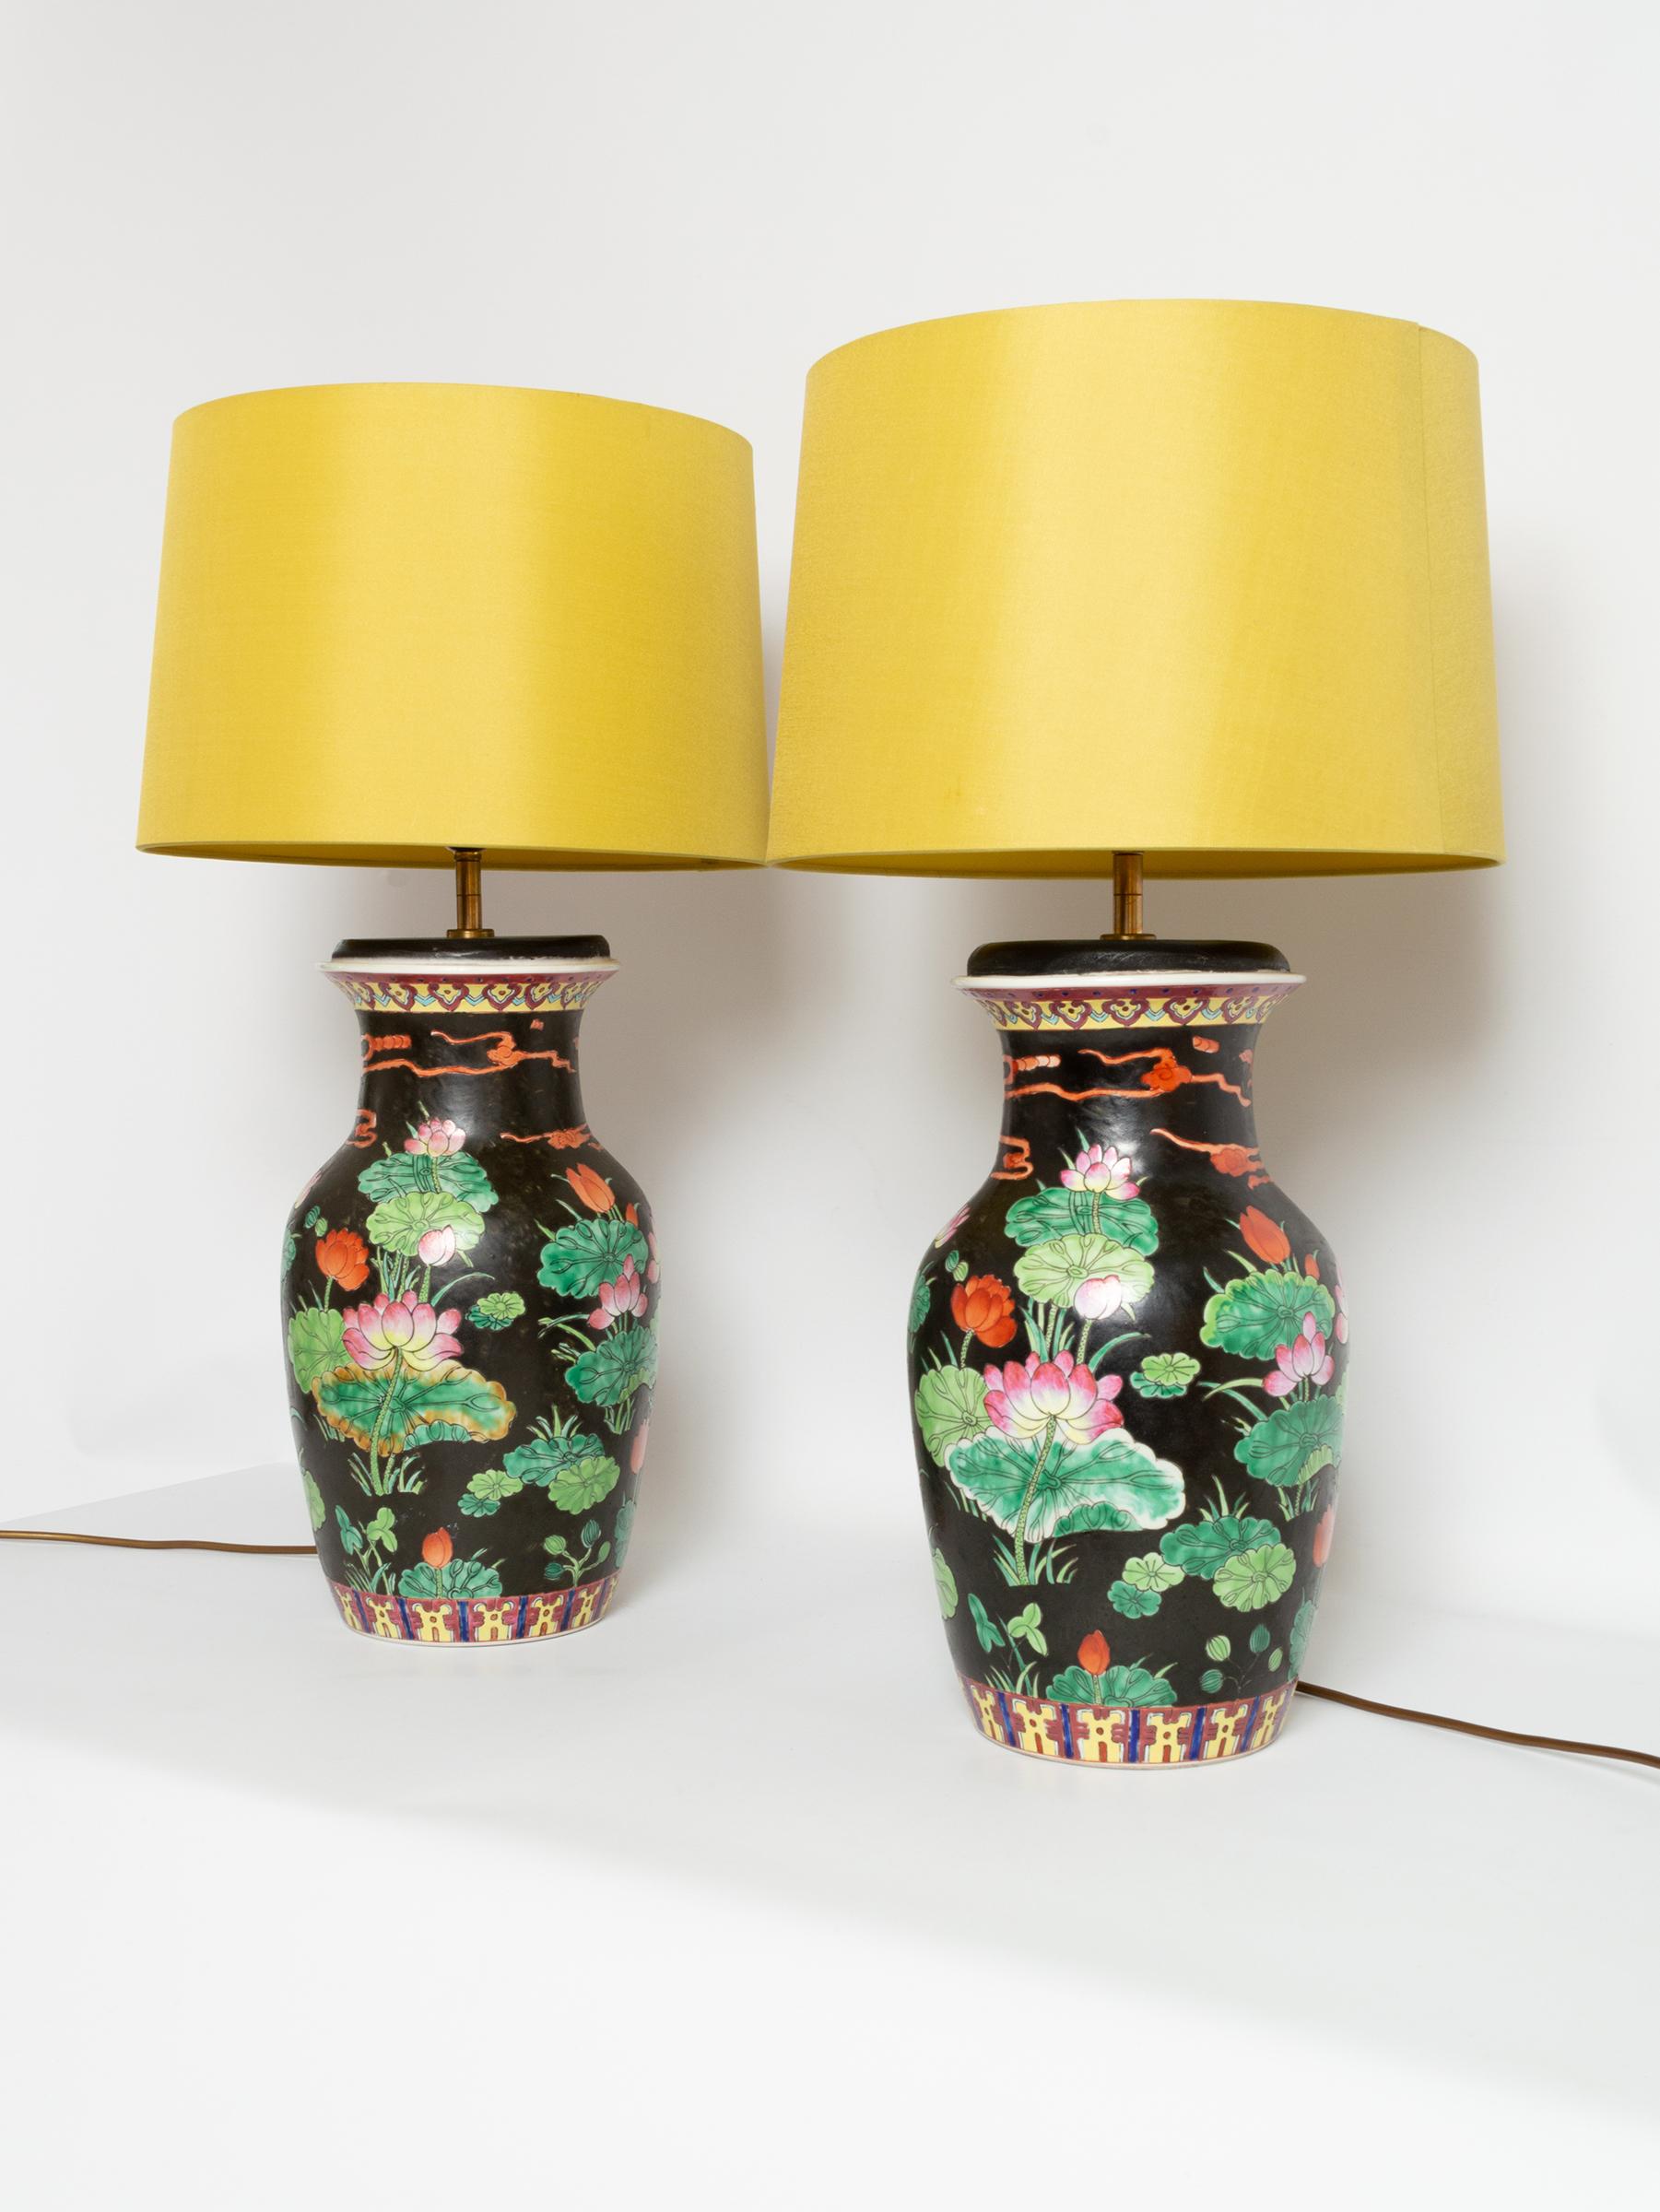 Antique Pair of 19th Century Famille Noire Chinese Vase Lamps, circa 1860 For Sale 2